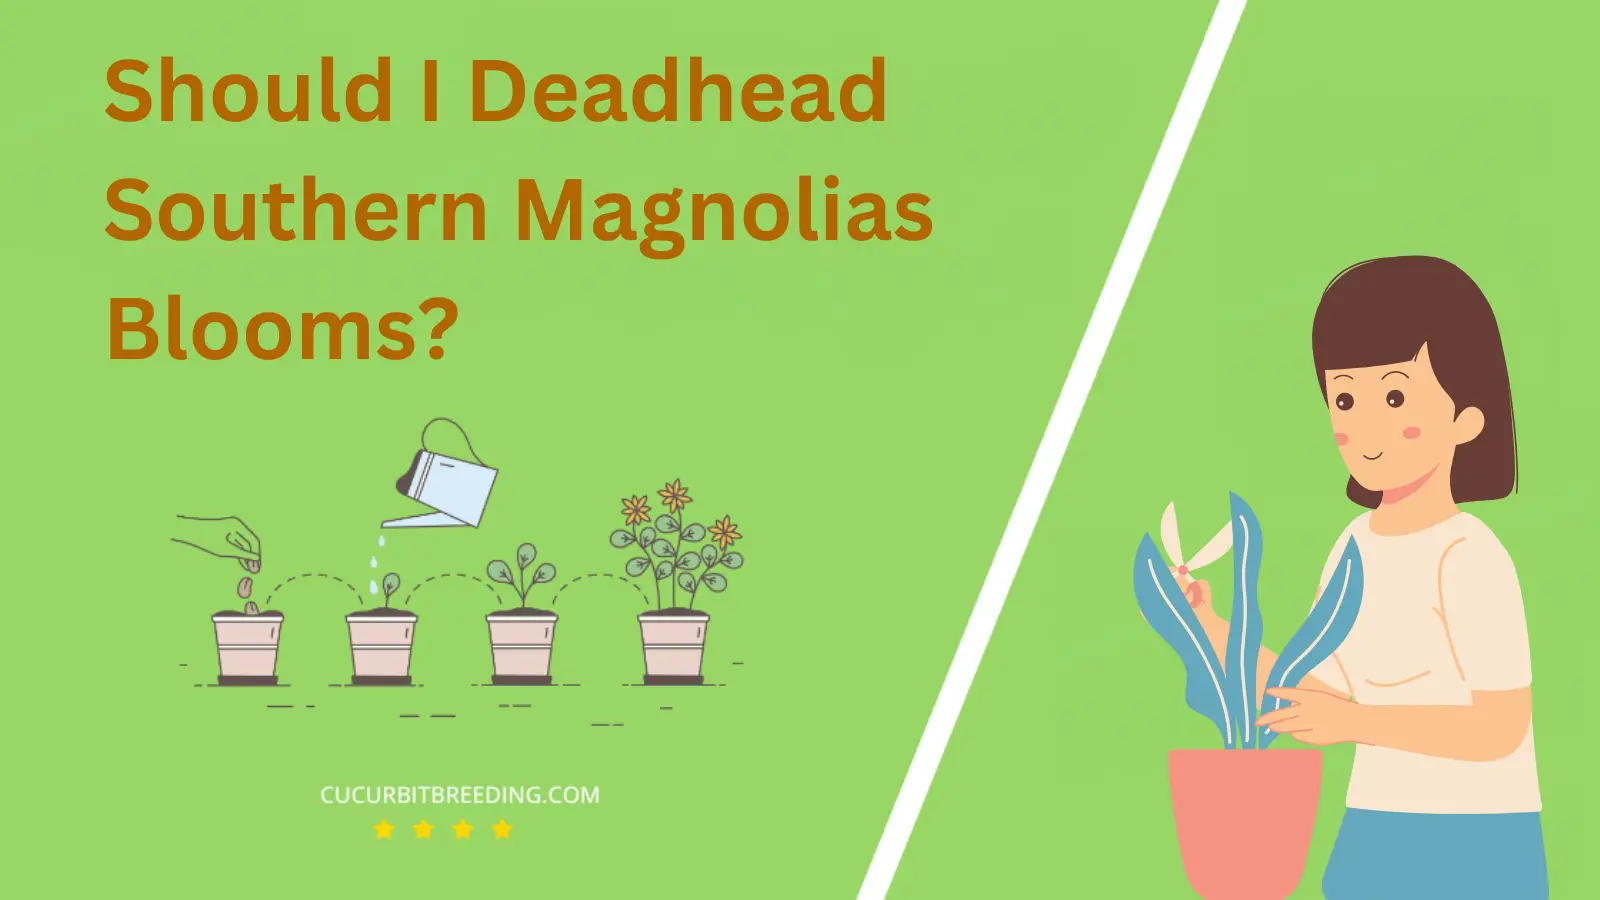 Should I Deadhead Southern Magnolias Blooms?